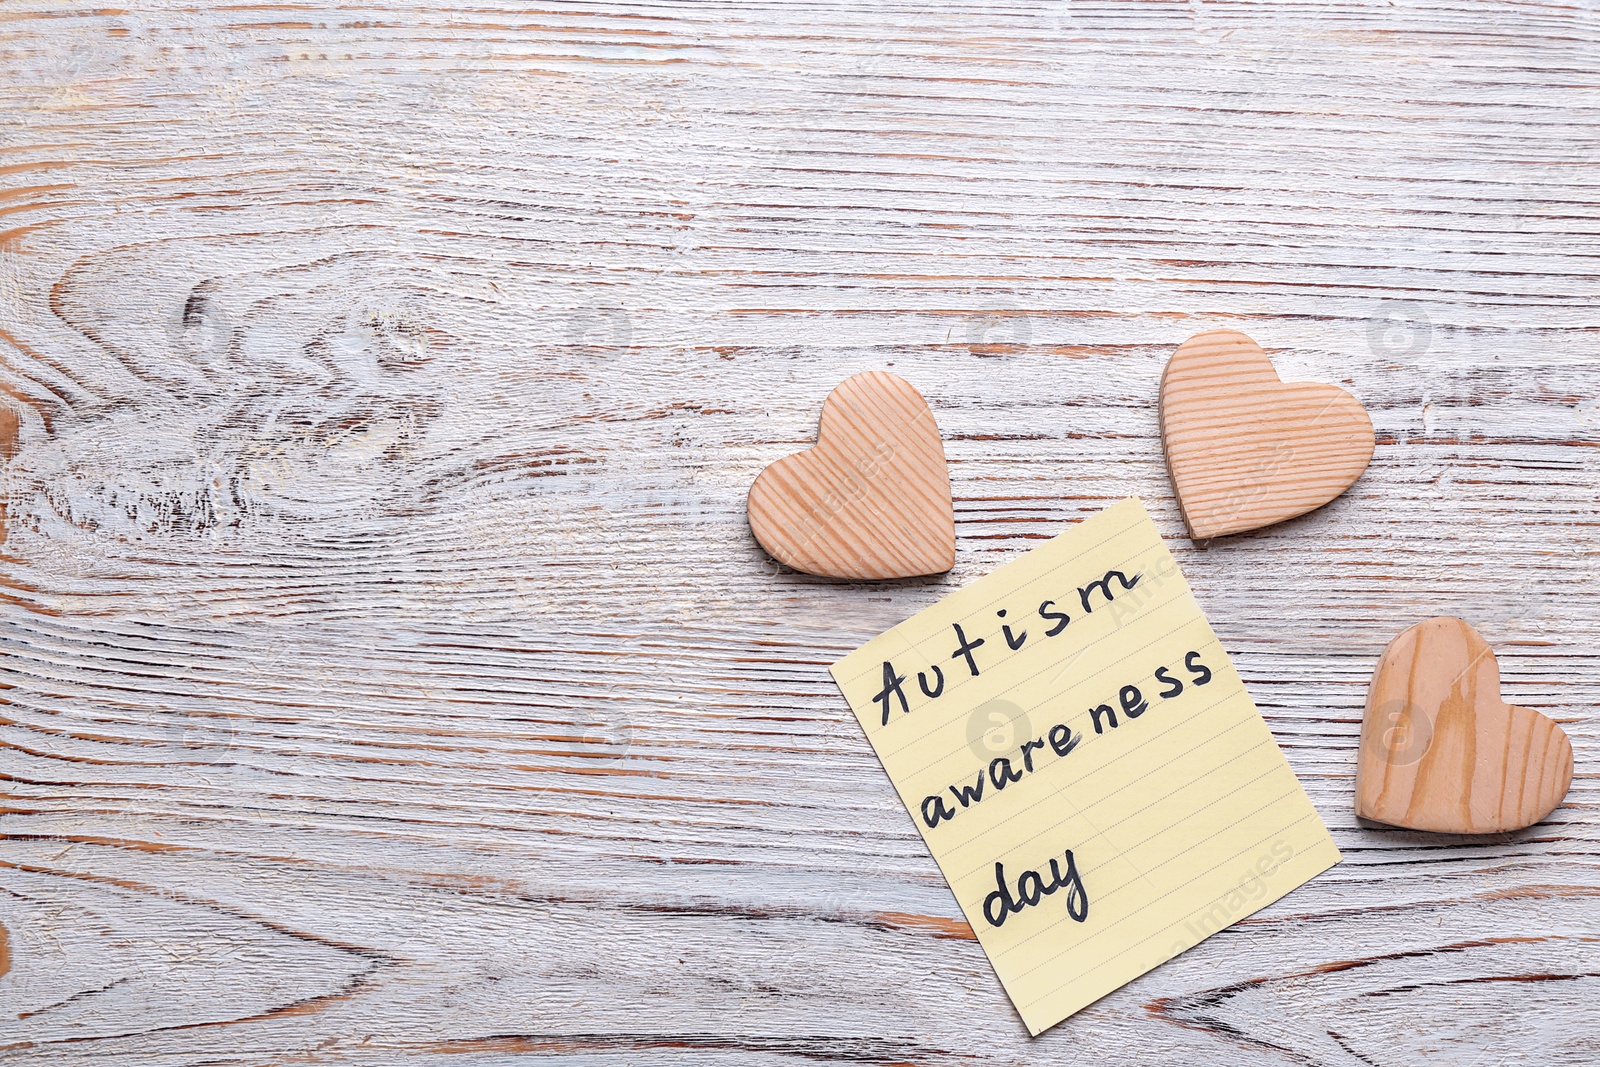 Photo of Sticky note with phrase "Autism awareness day" on wooden background